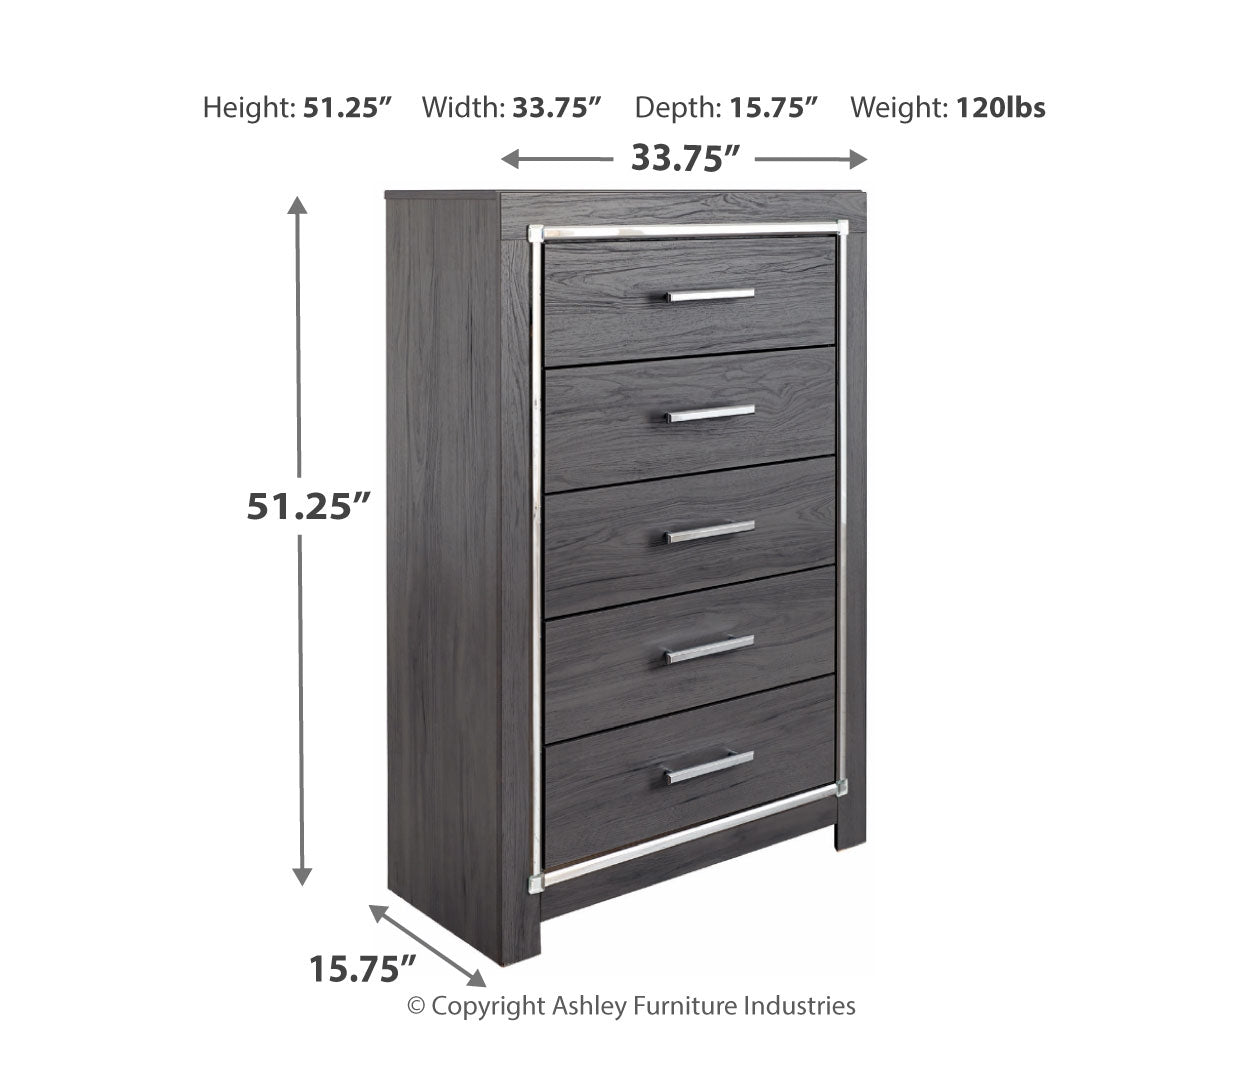 Lodanna Chest of Drawers